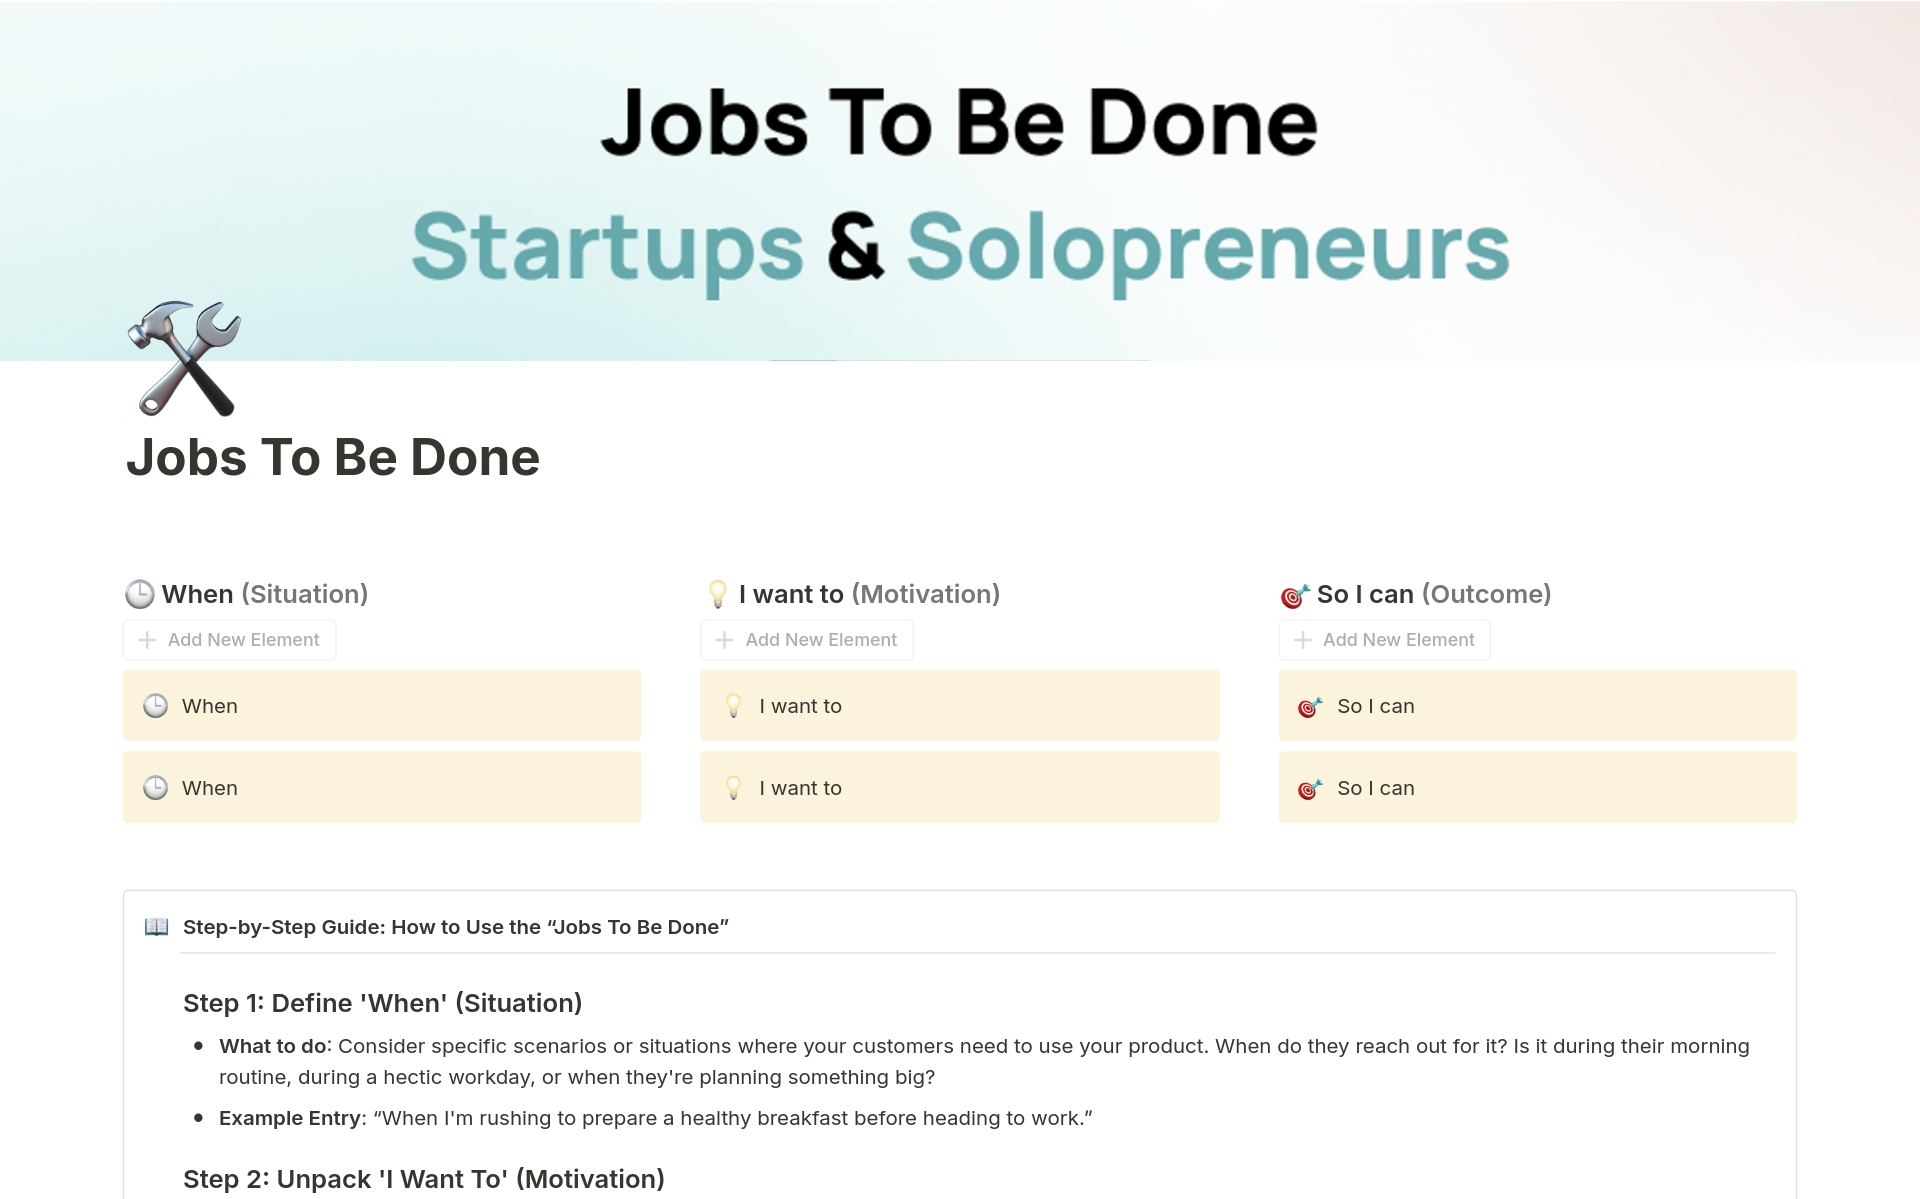 A template preview for Jobs To Be Done for Startups & Solopreneurs